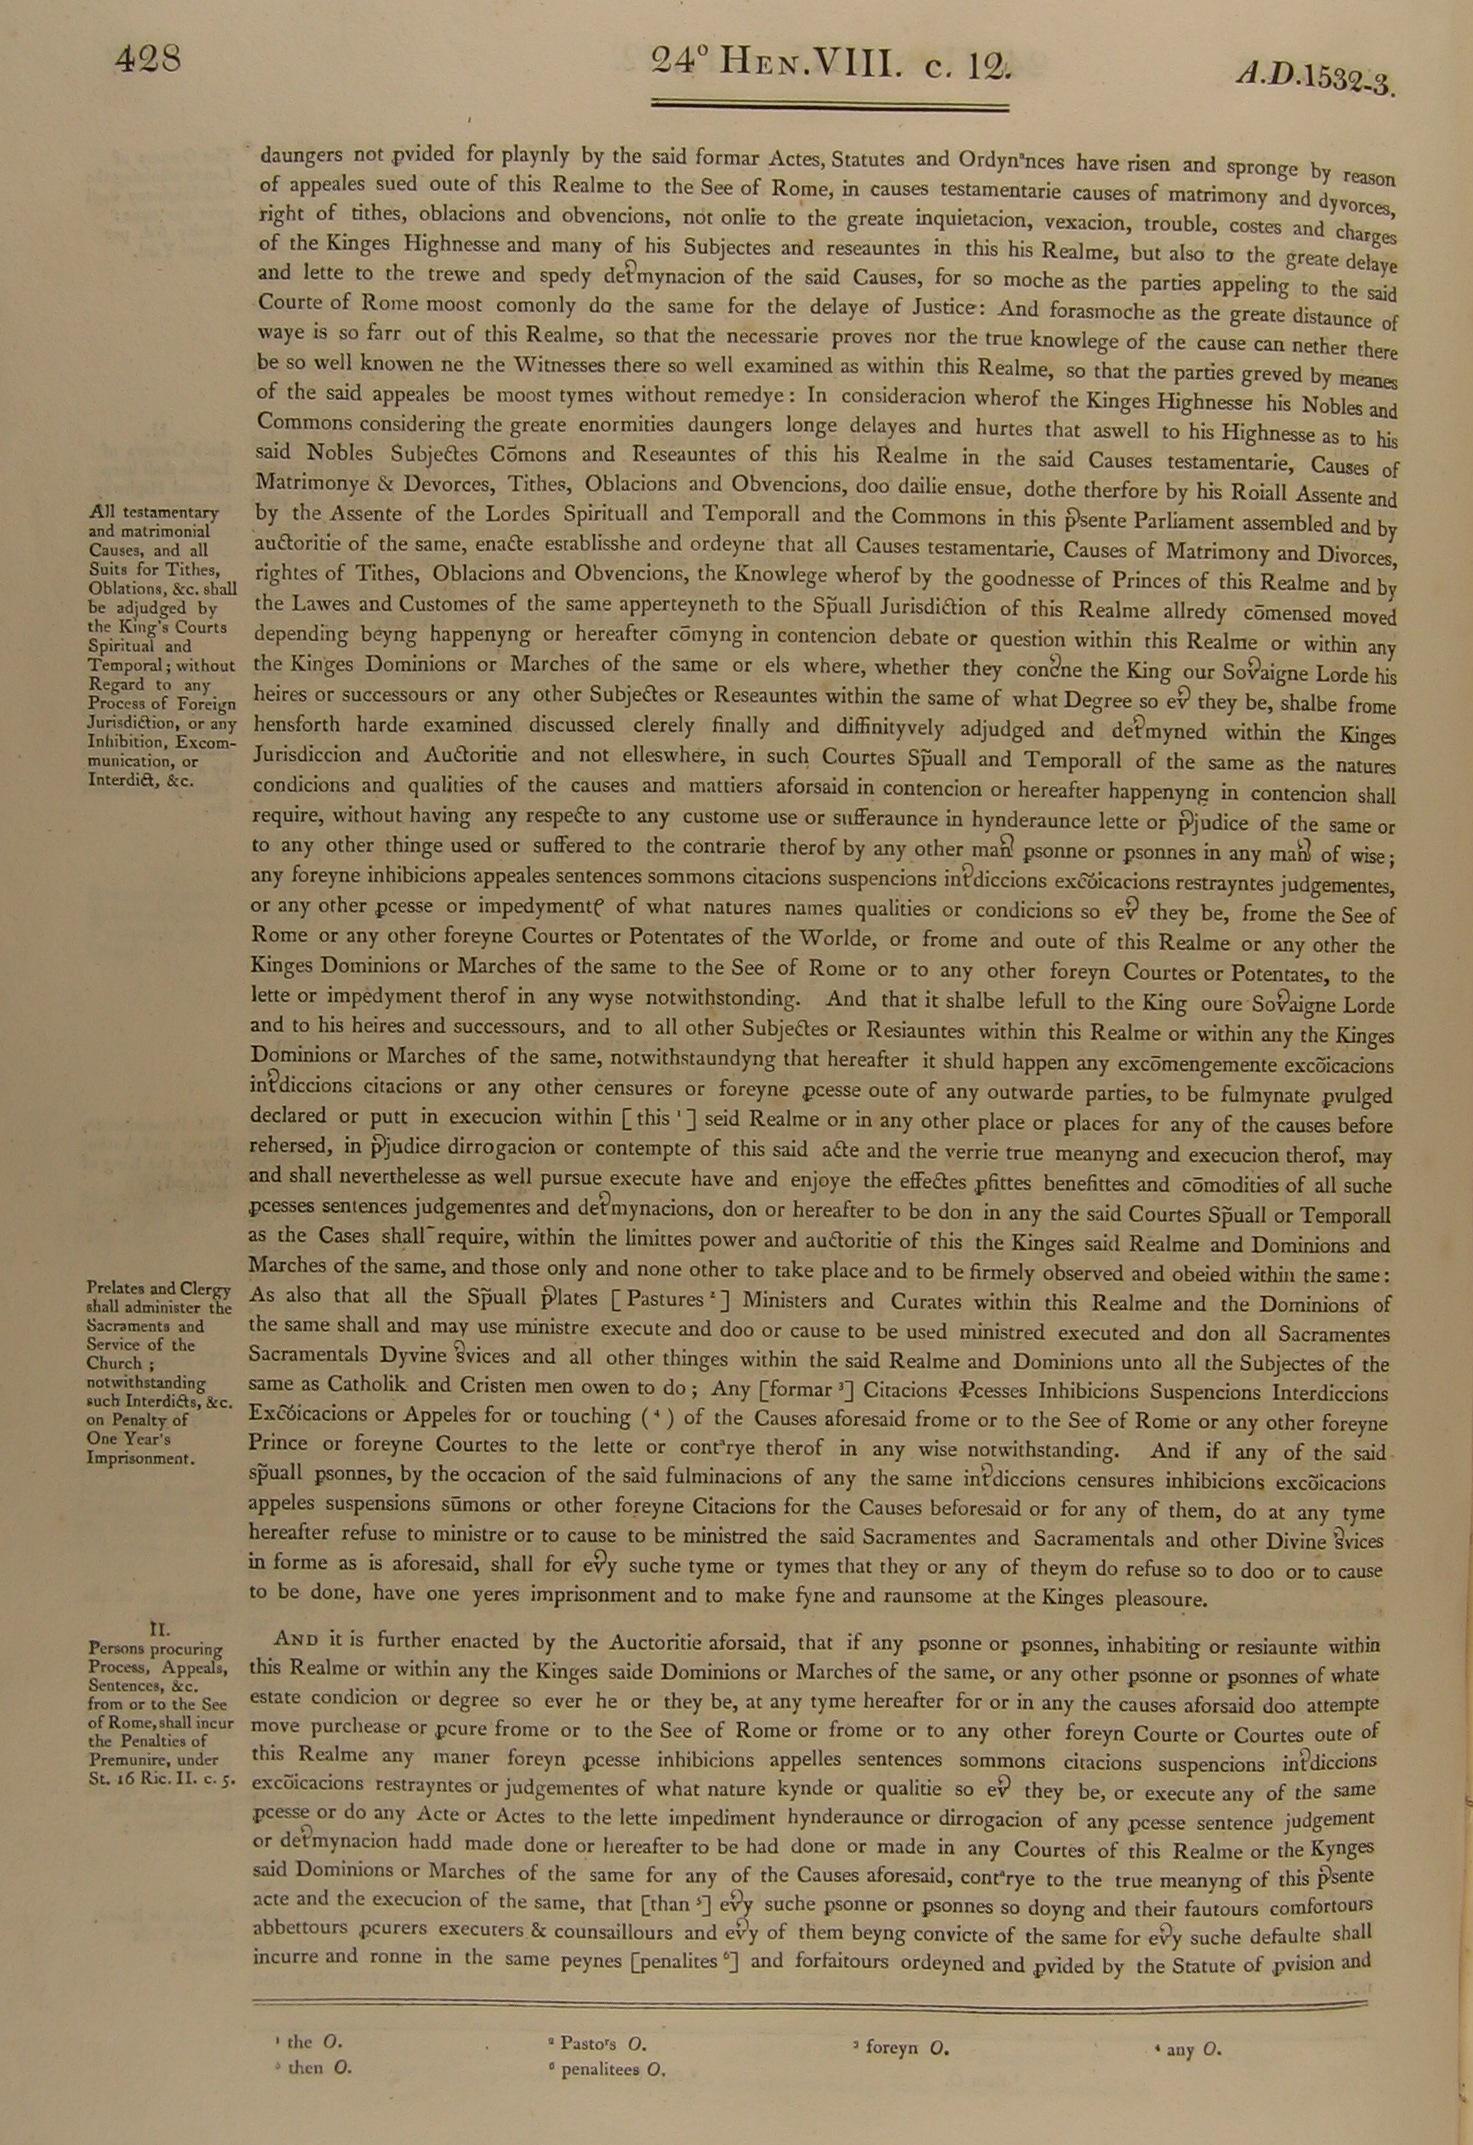 Image of 24 Henry VIII, c. 12 (page 2 of 3). Click for larger image.